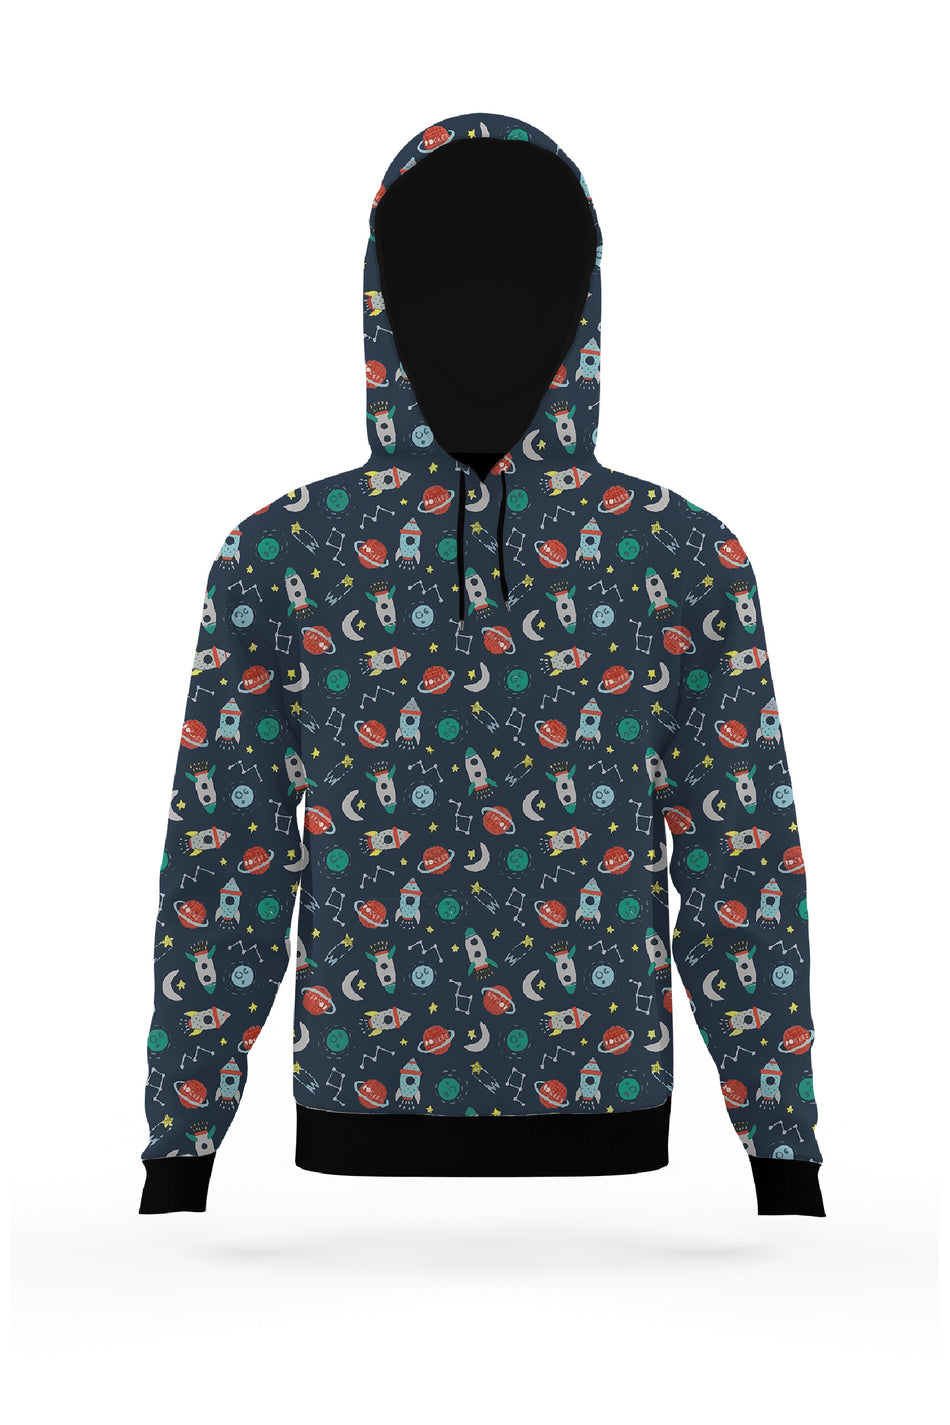 AOPH - ASTRO SPACE WORLD HOODIE